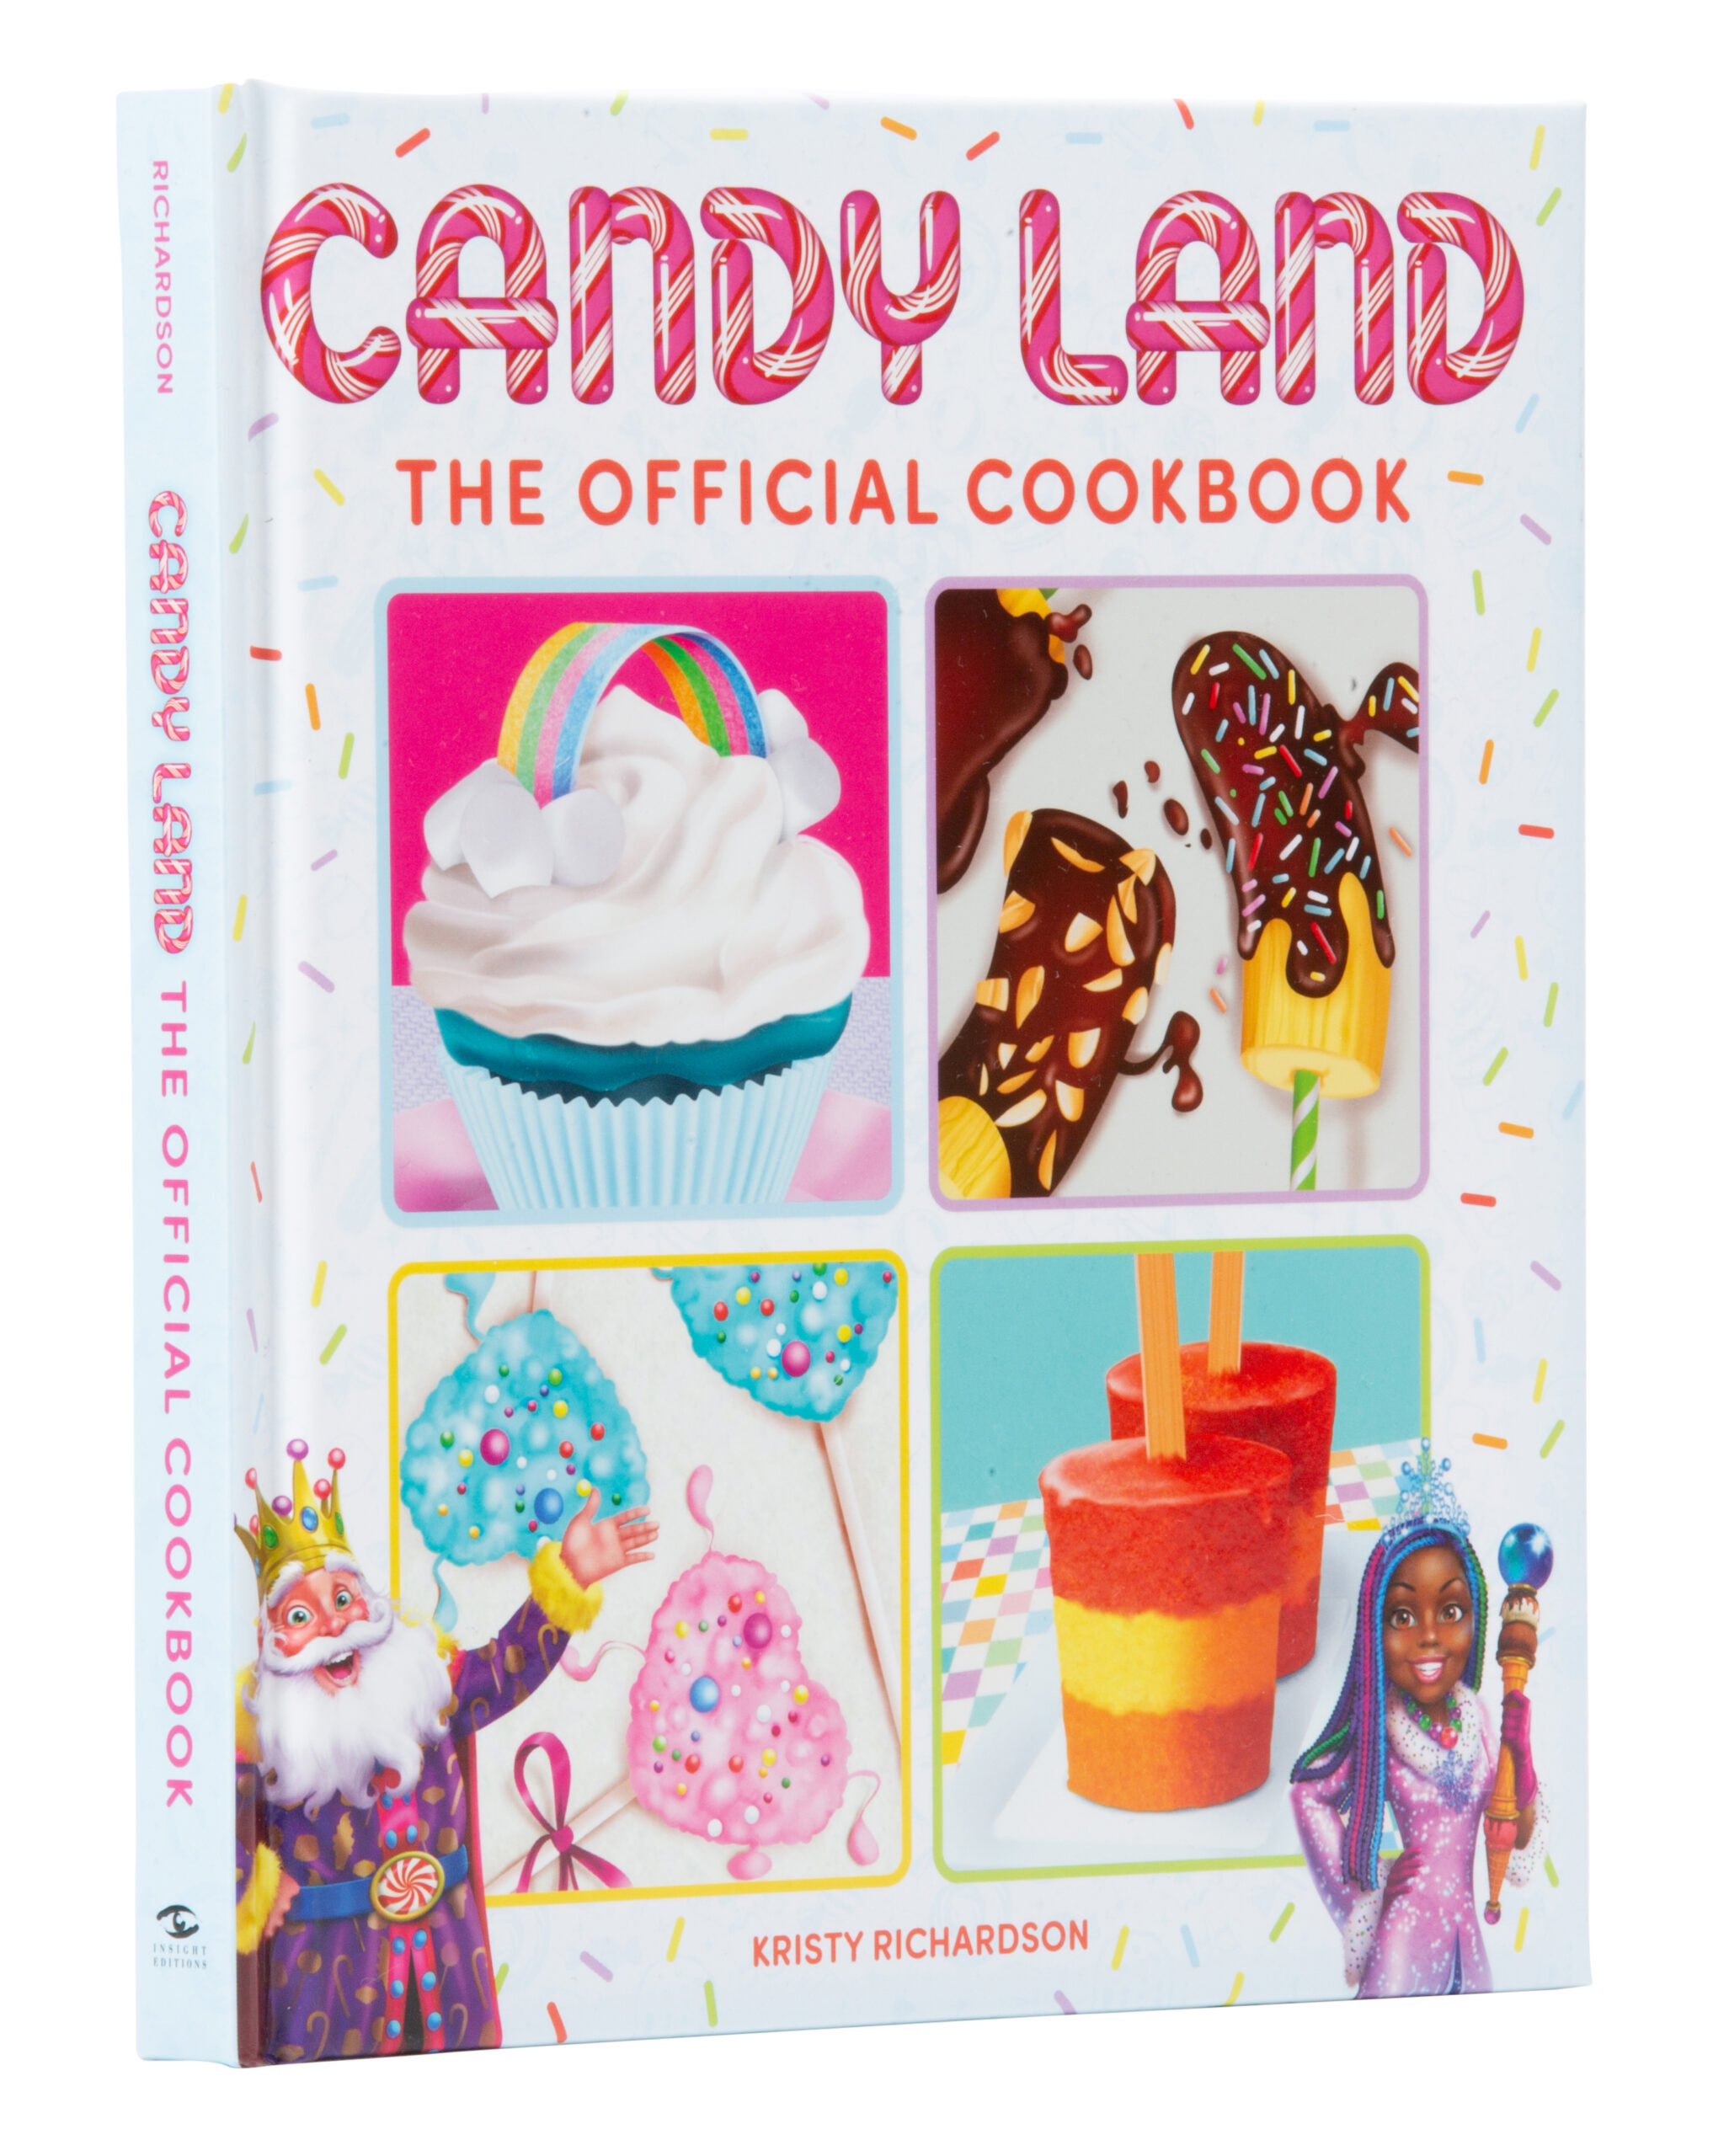 Official Candy Land Cookbook cover.